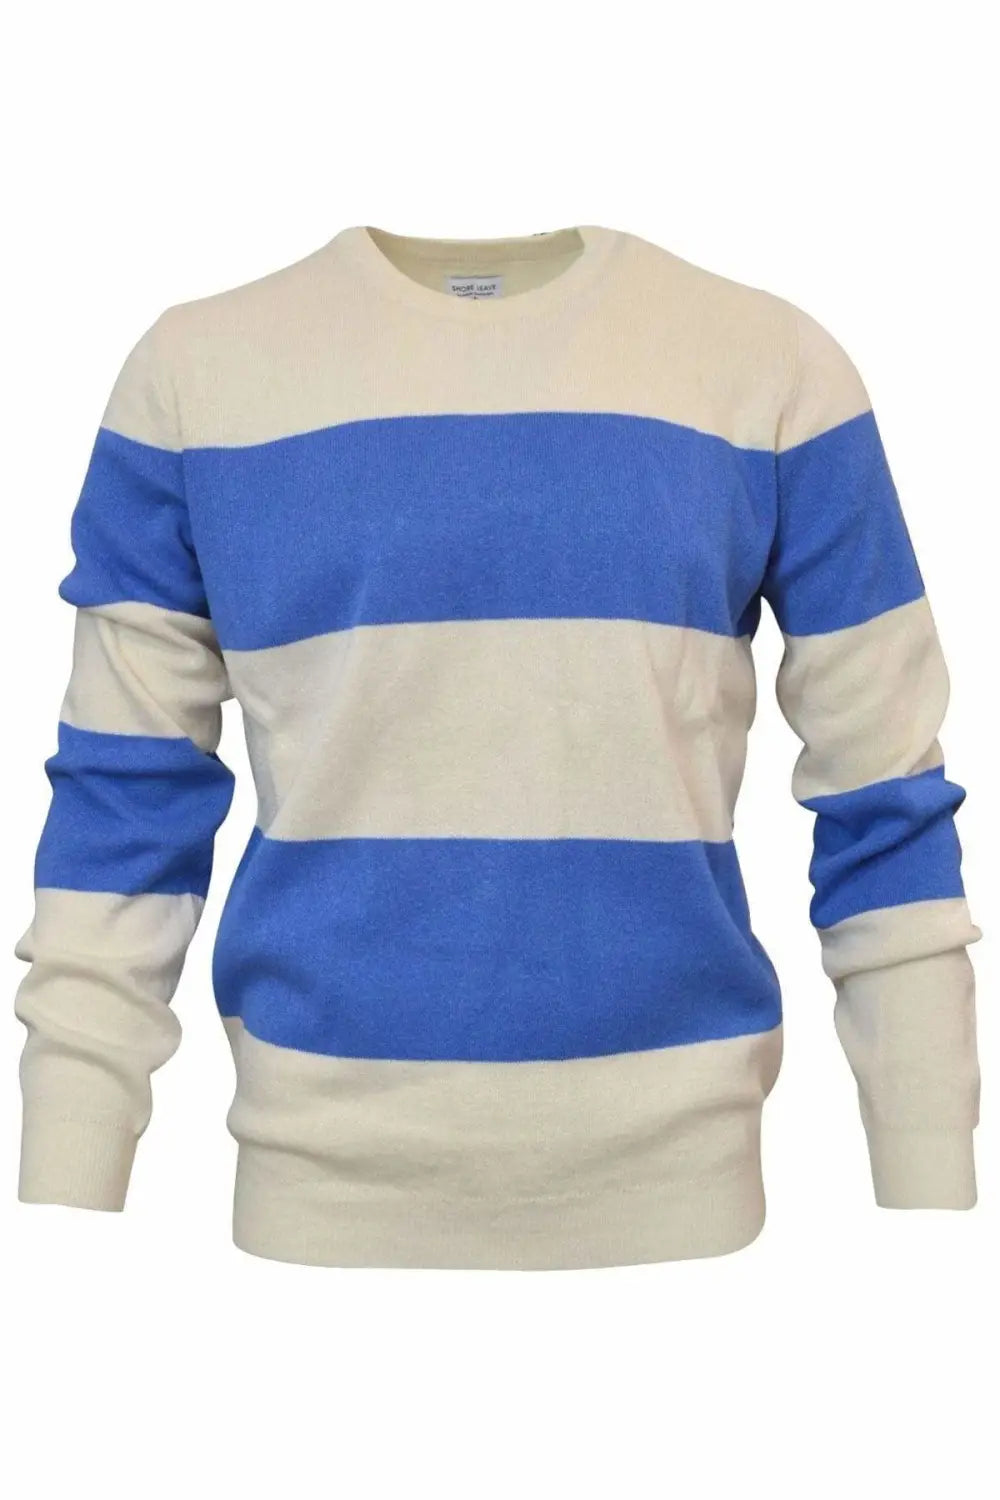 Urban Outfitters Striped Cotton Jumper